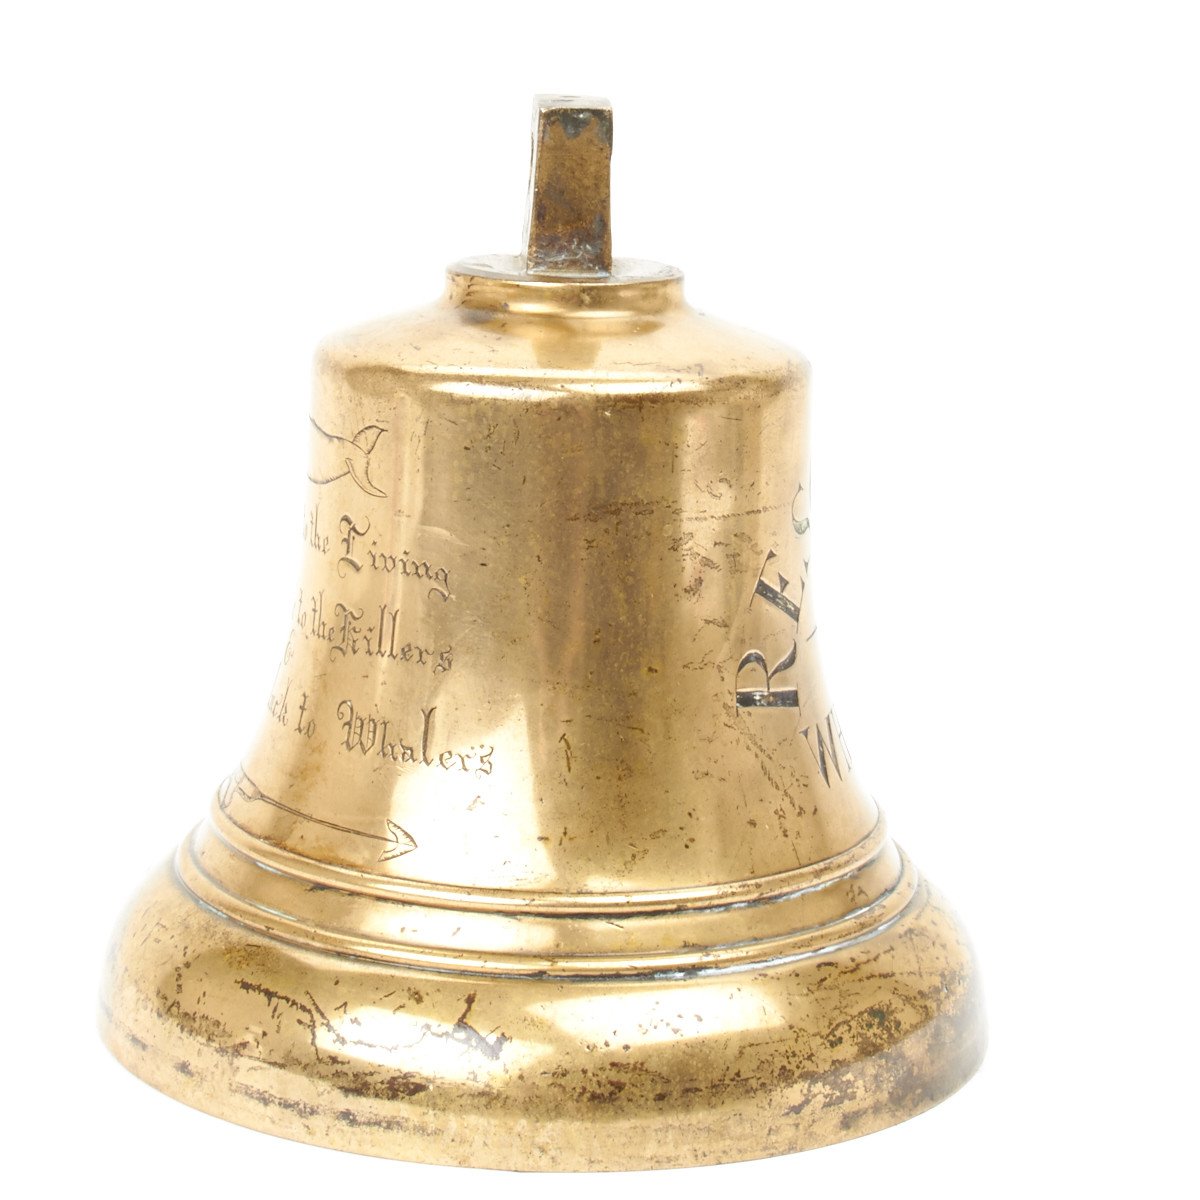 Original Brass Whaling Ship Bell from the Resolution Circa 1810